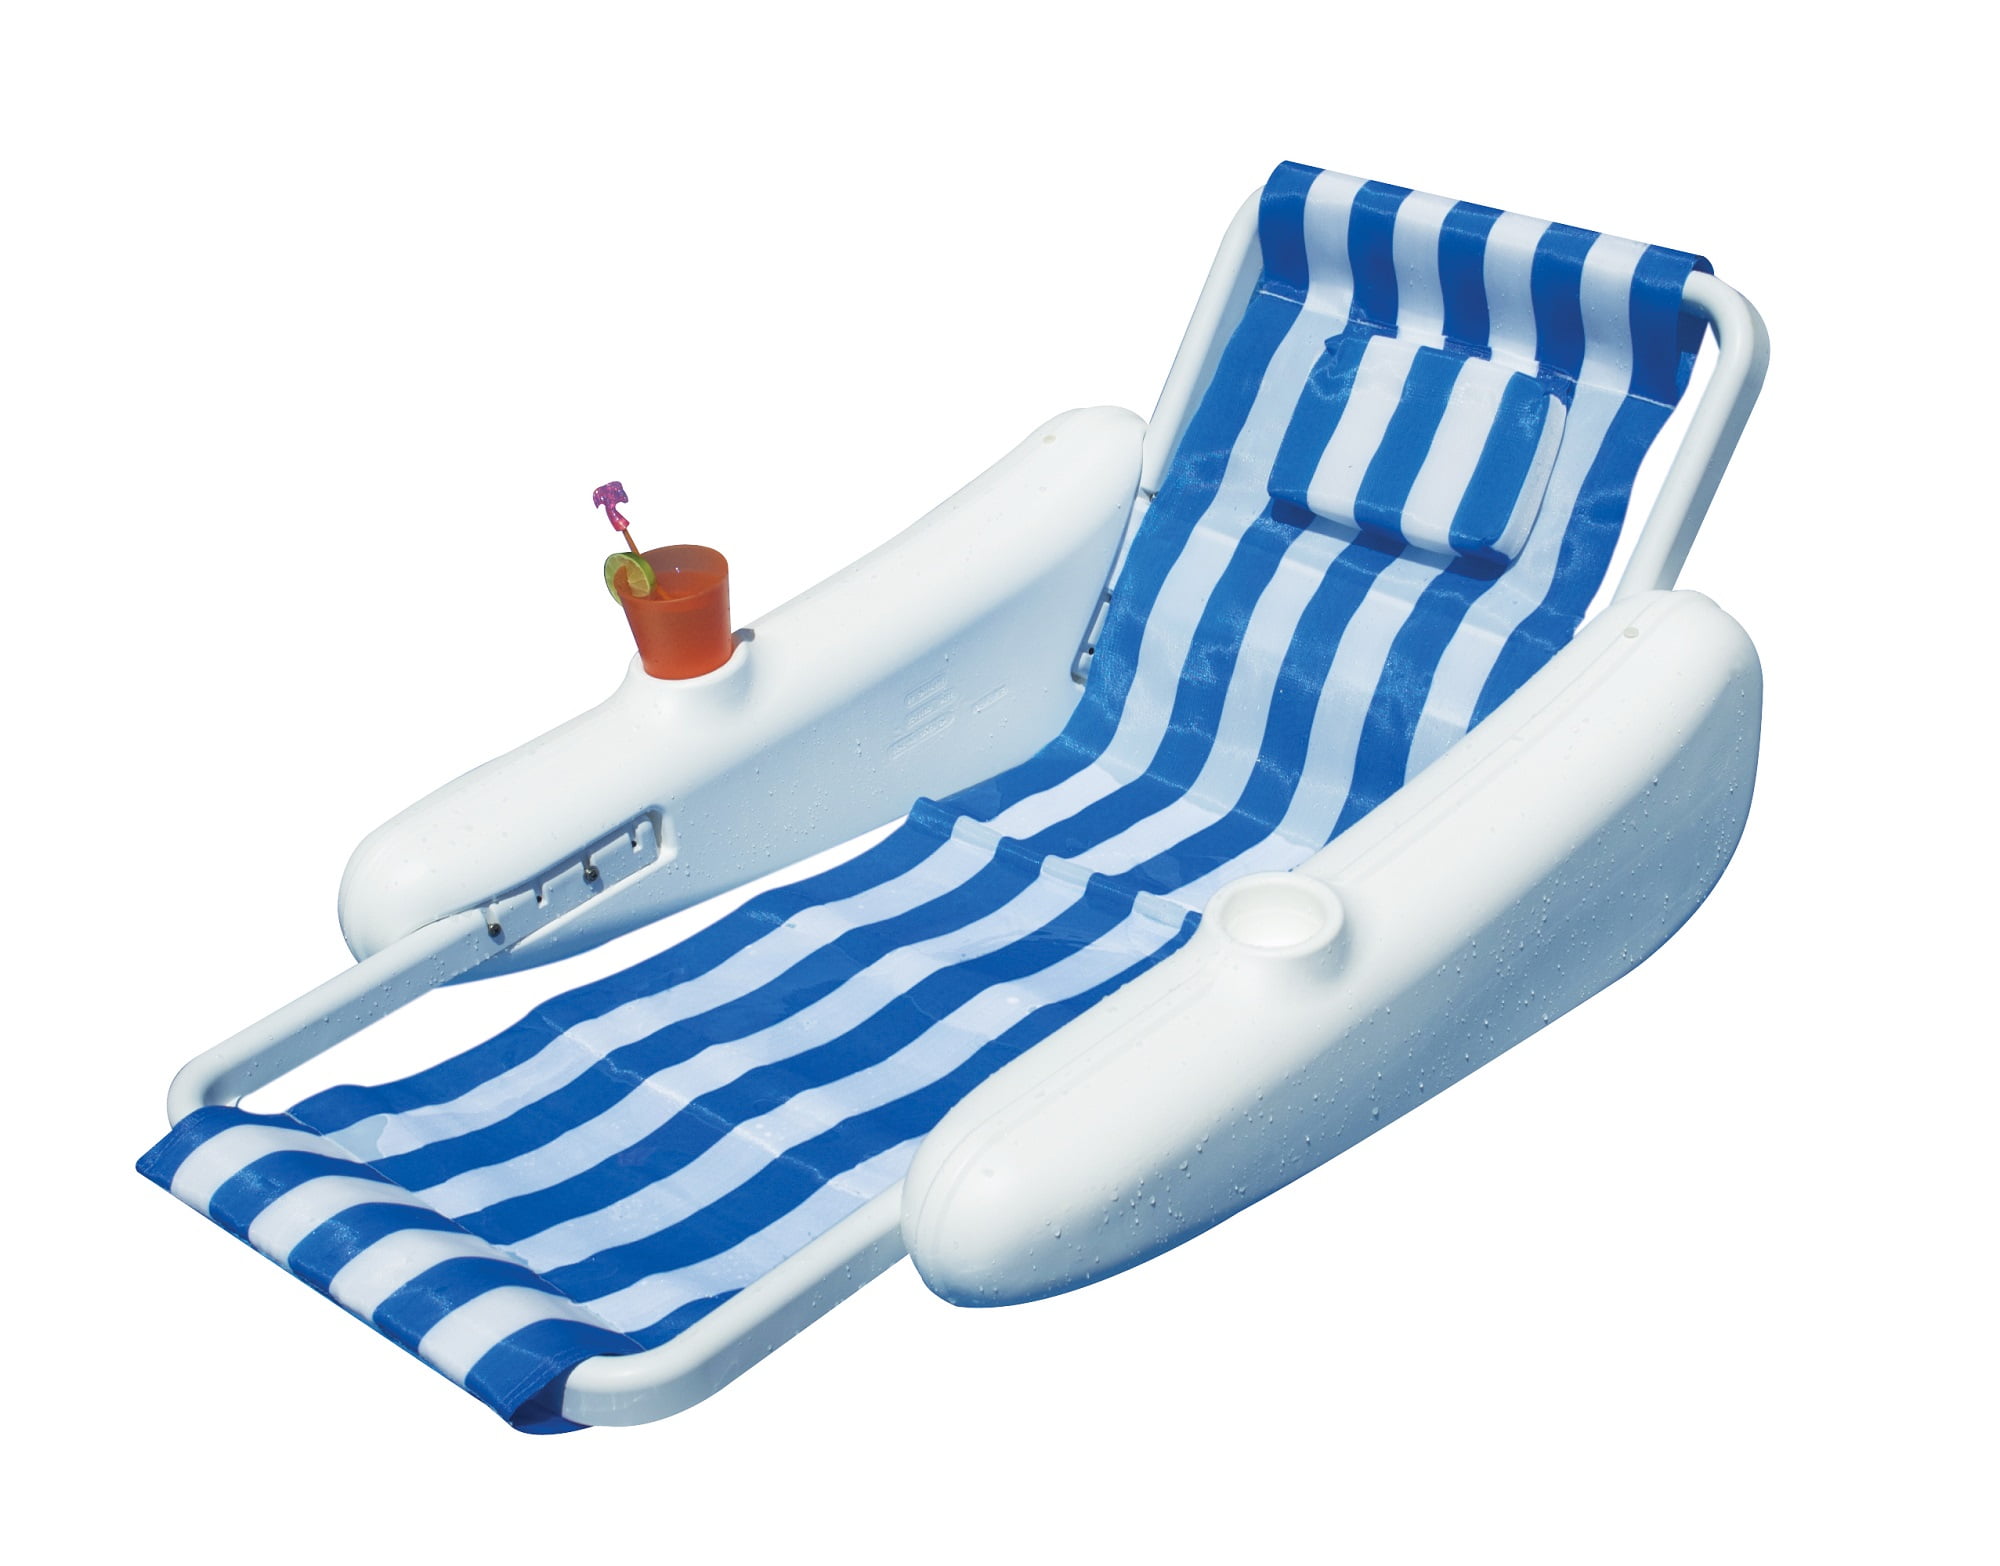 Swimline 68.5" Sunchaser 1-Person Swimming Pool Floating Lounge Chair